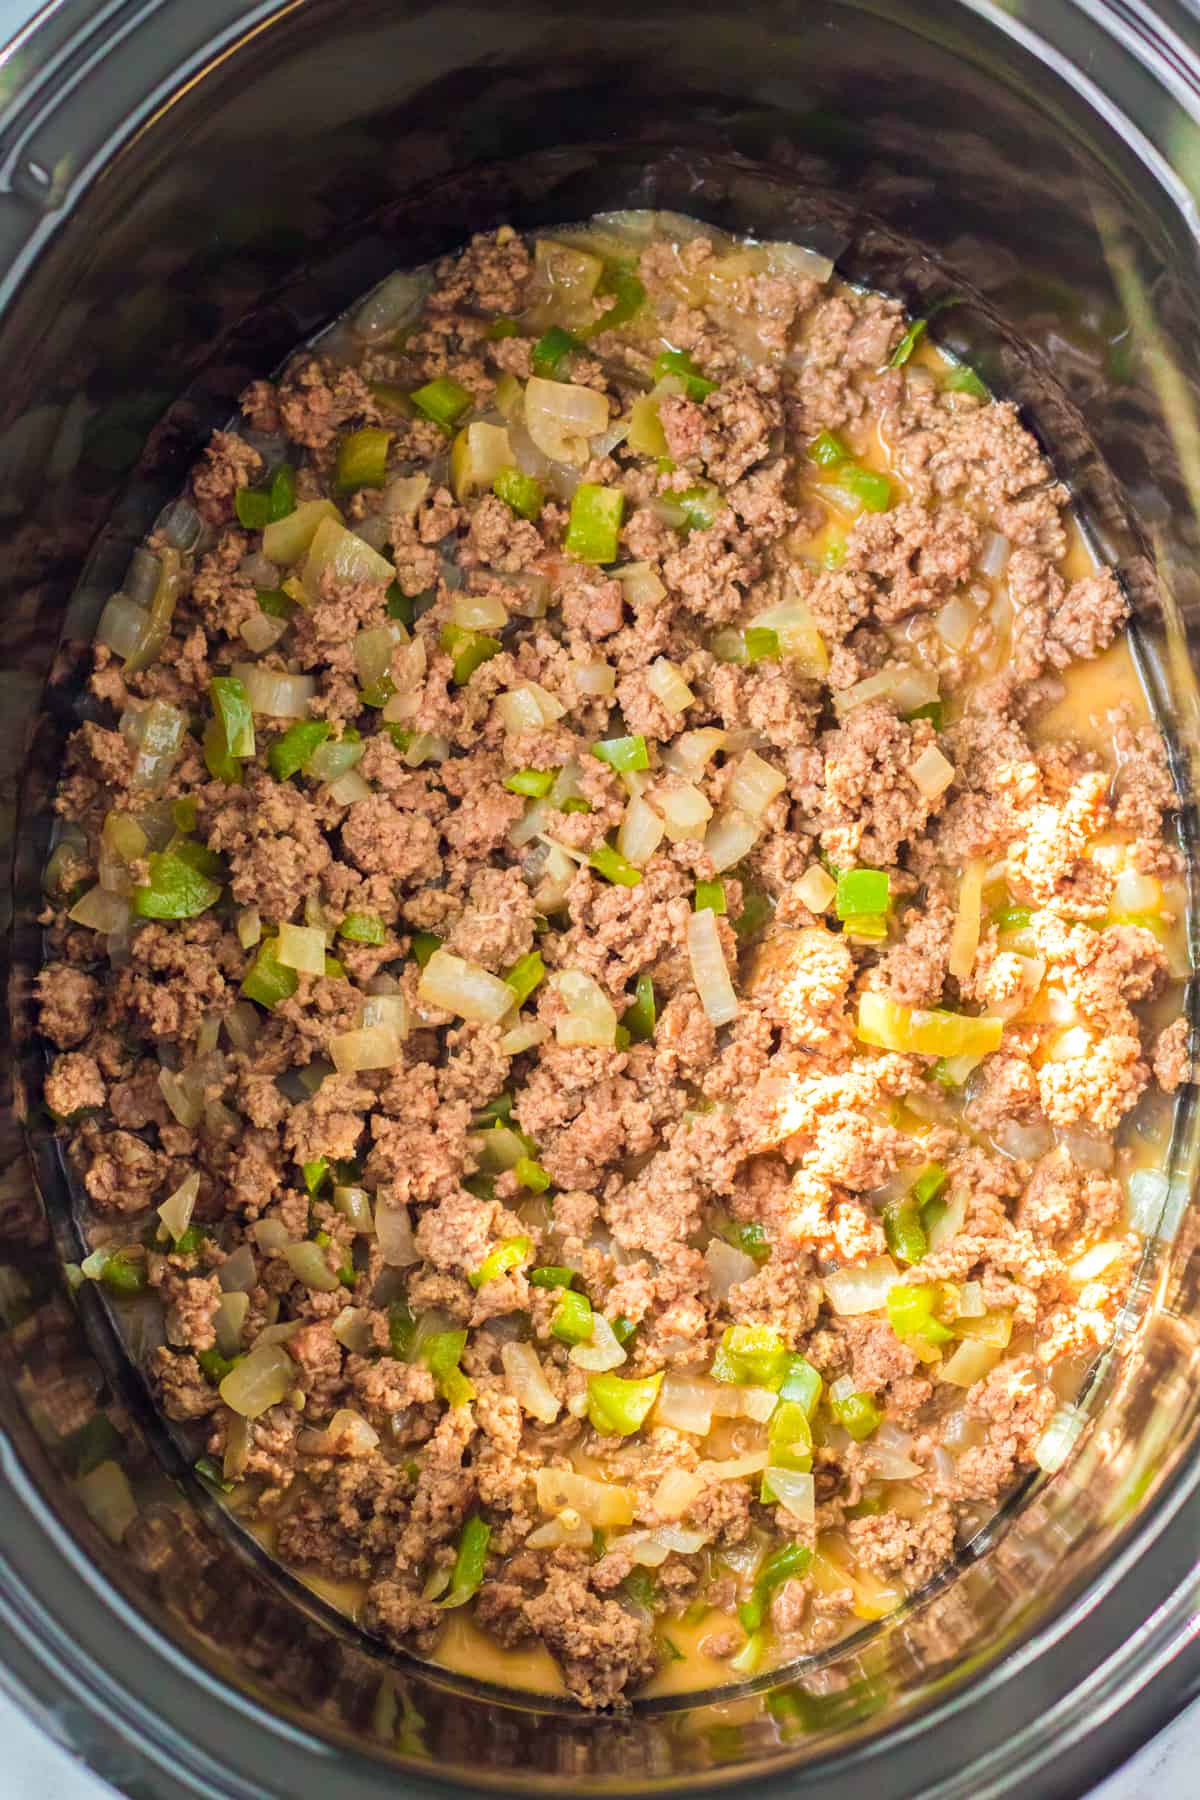 Ground beef with onions and peppers in slow cooker.